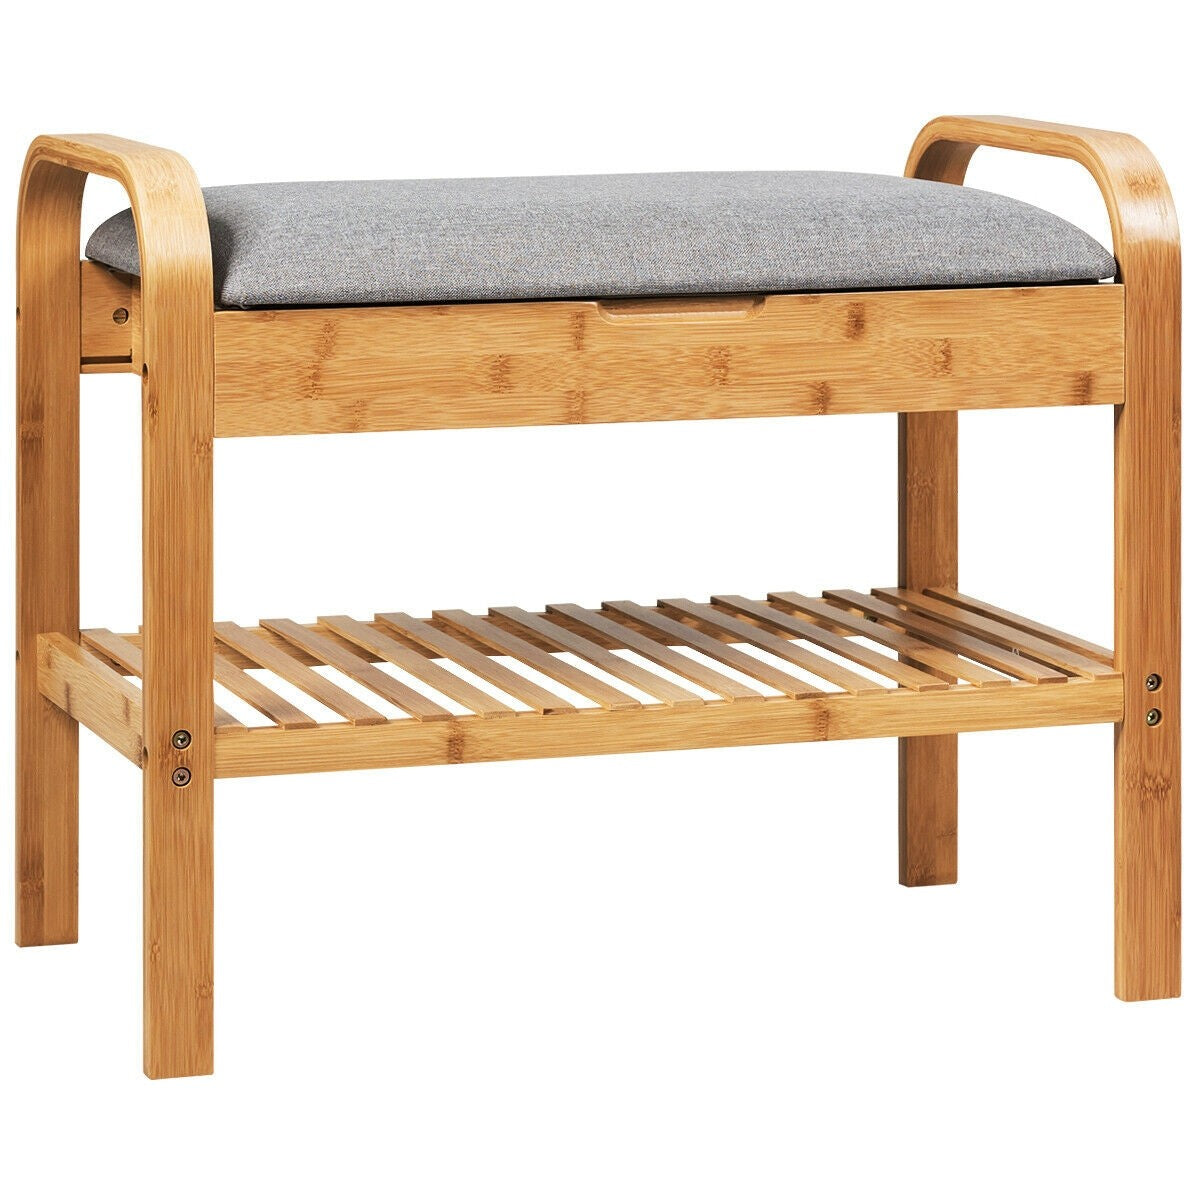 Giantex Shoe Rack Bench with Storage, Bamboo Storage Bench with Cushioned Seat, Holds Up to 330 LBS